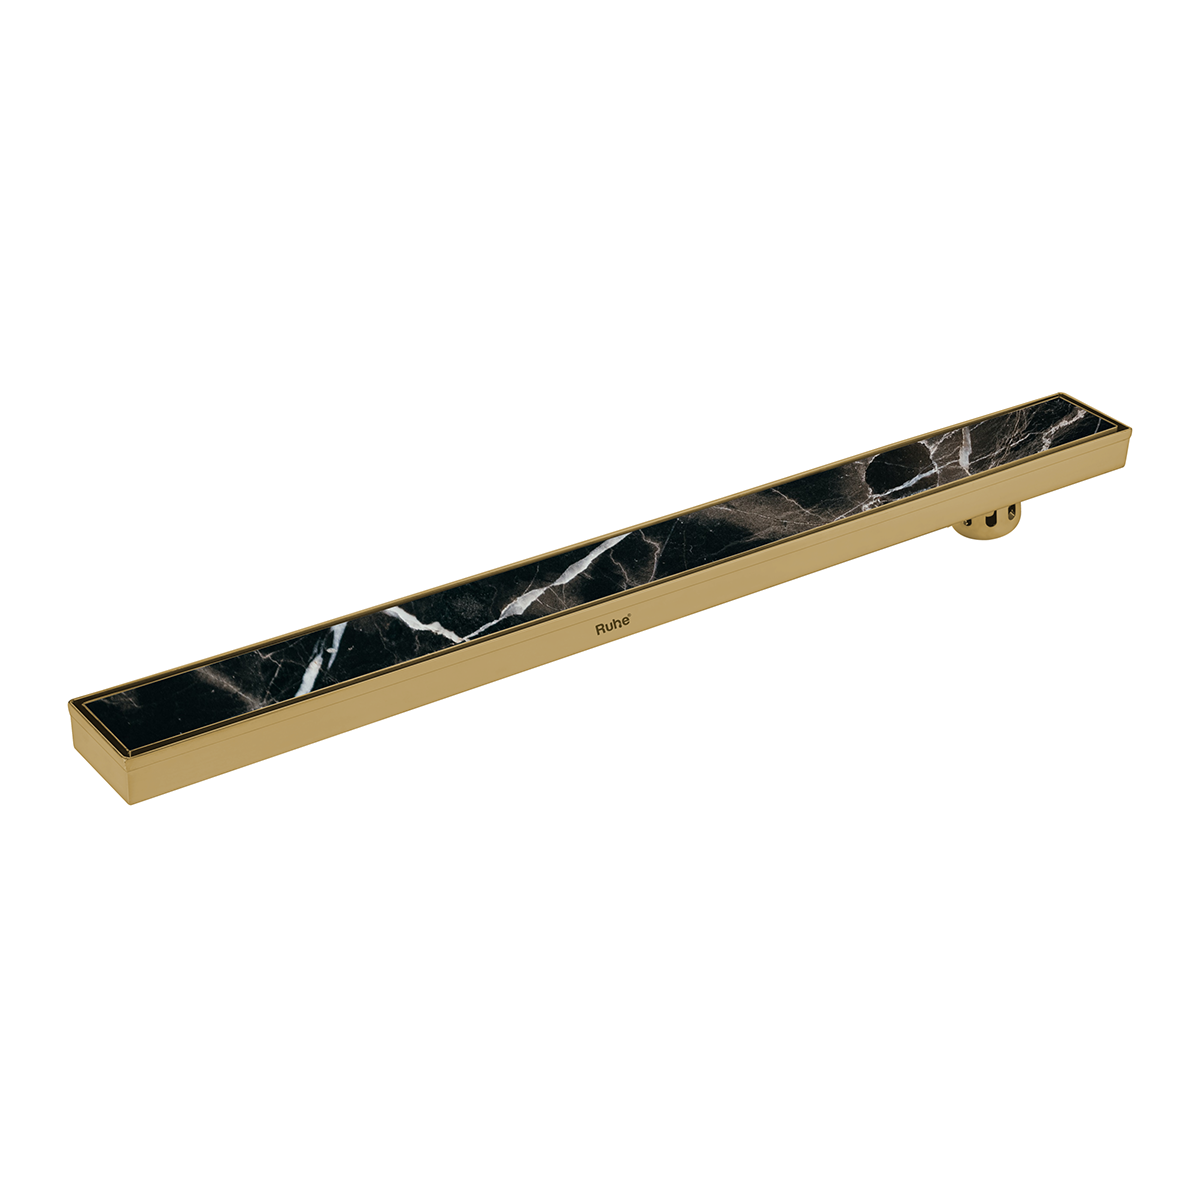 Marble Insert Shower Drain Channel (36 x 3 Inches) YELLOW GOLD PVD Coated